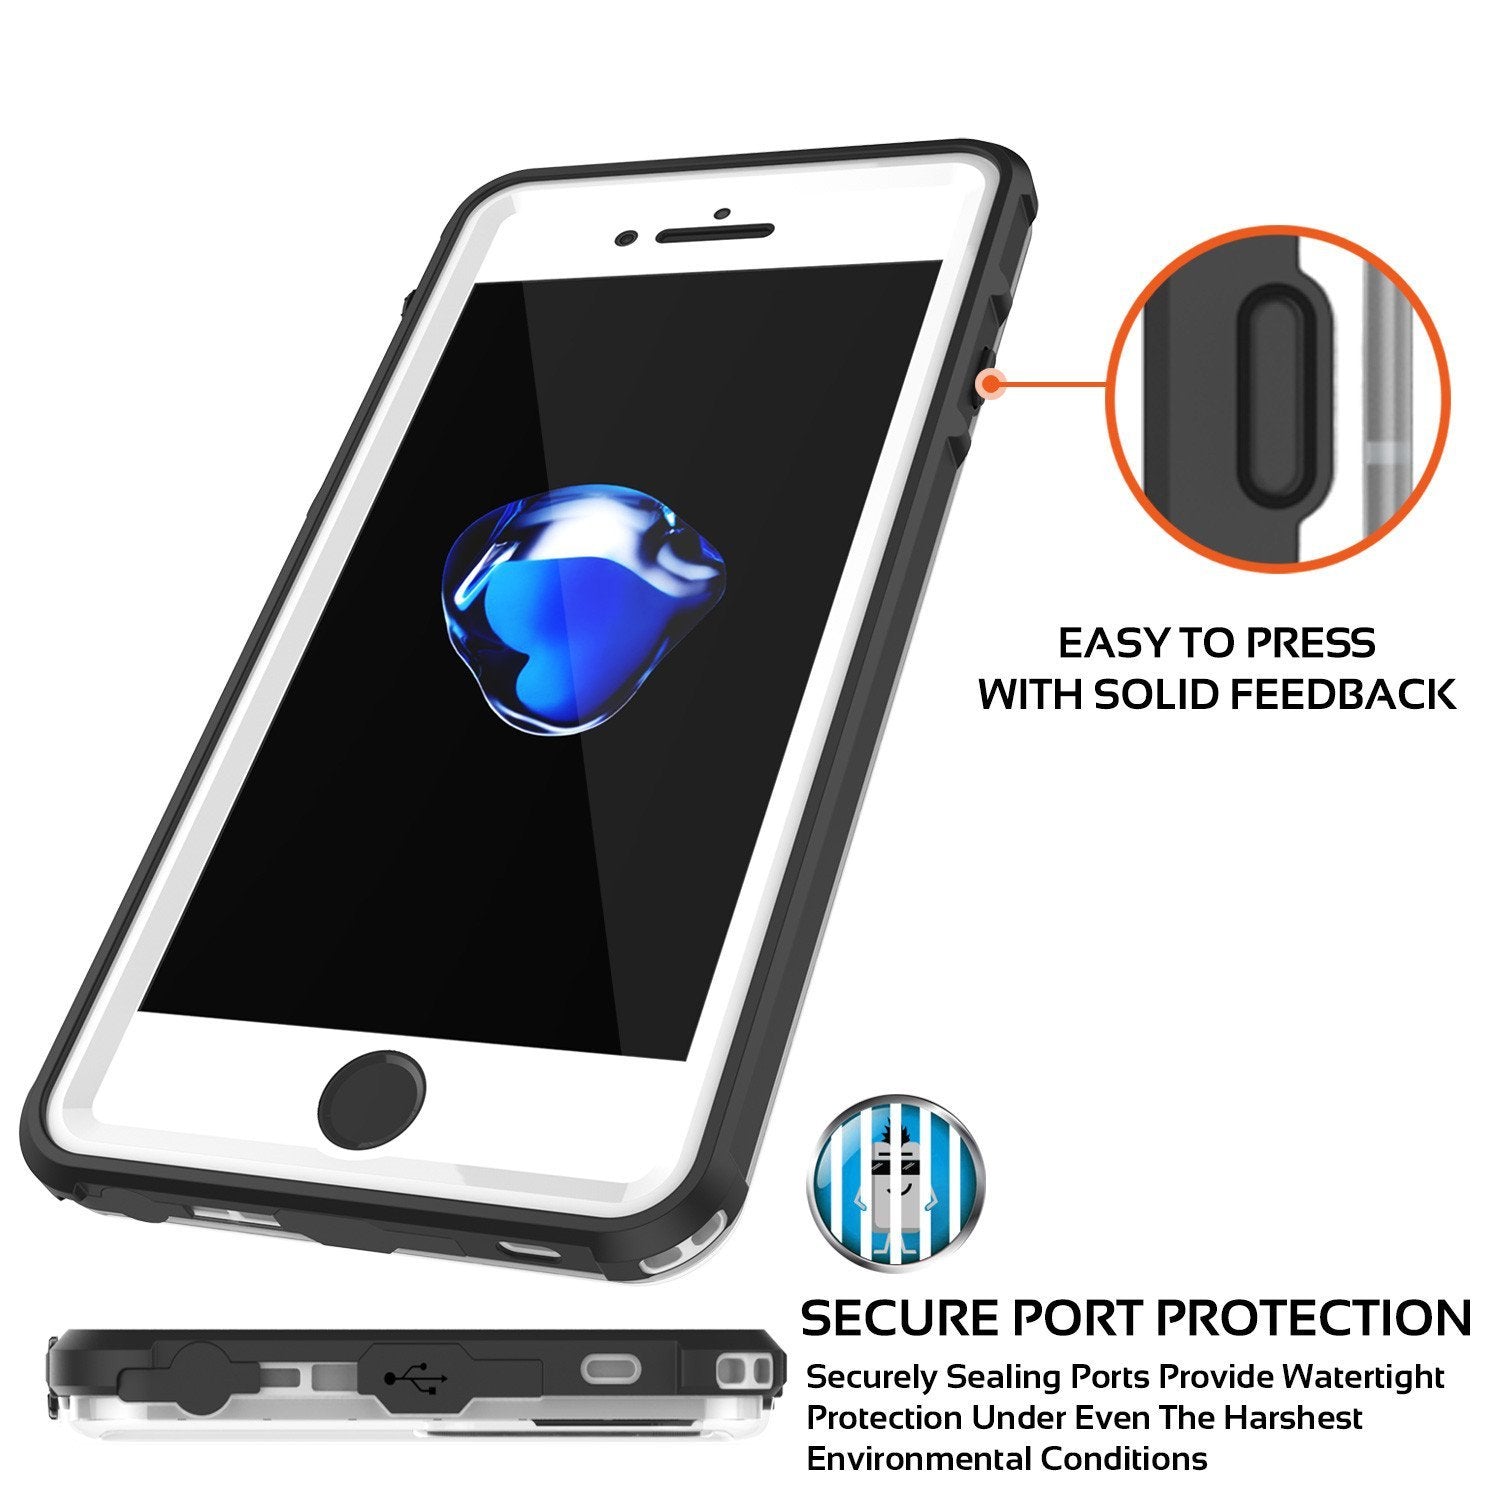 Apple iPhone 8 Waterproof Case, PUNKcase CRYSTAL White W/ Attached Screen Protector  | Warranty - PunkCase NZ